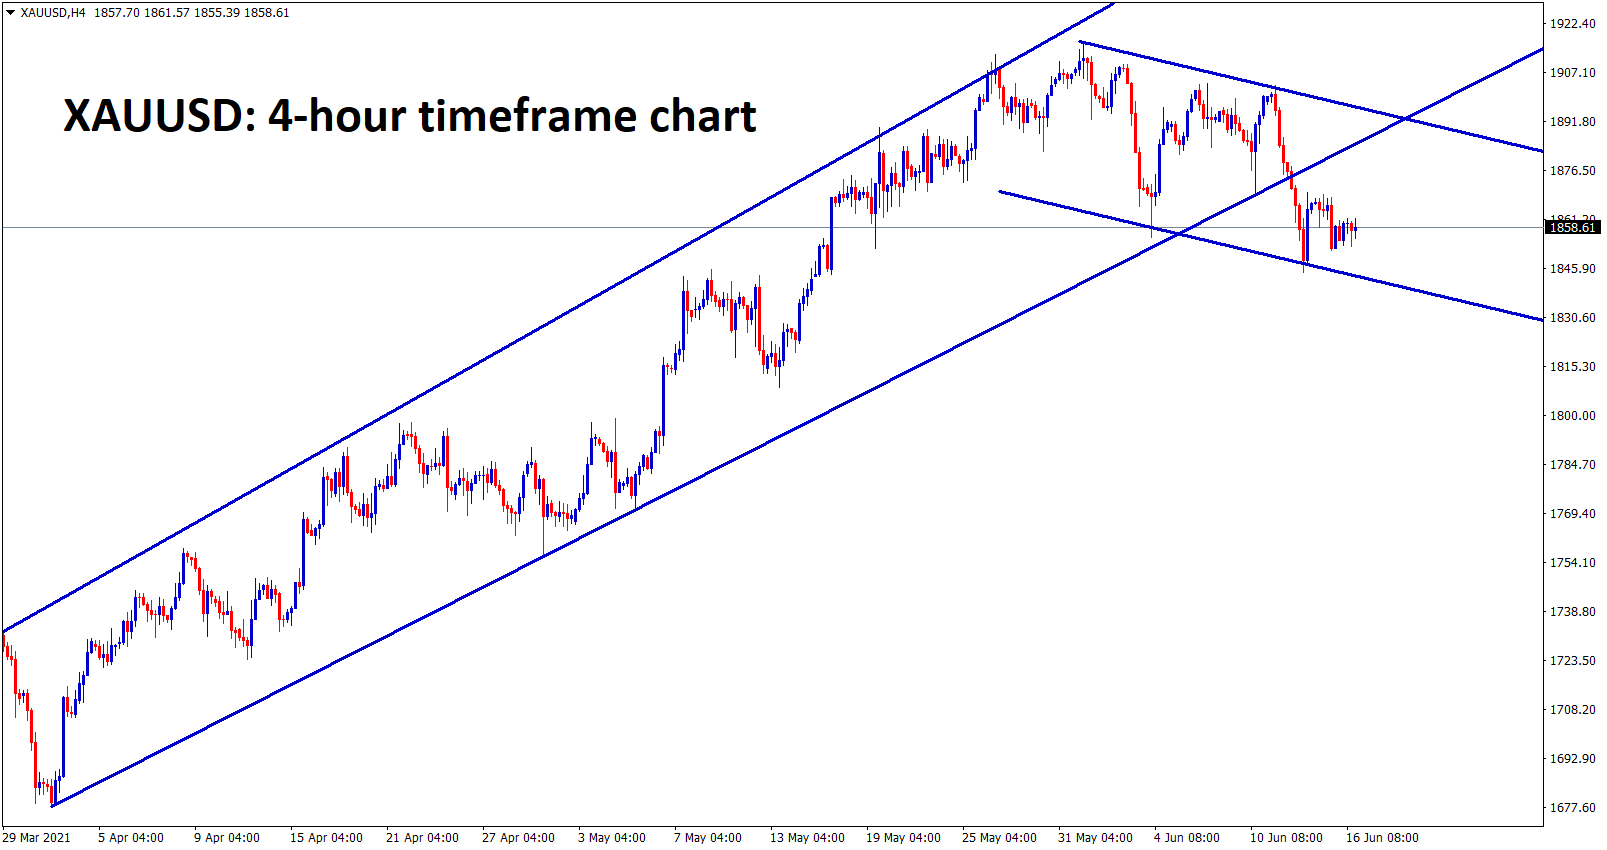 Gold is consolidating after breaking the bottom level of an uptrend line